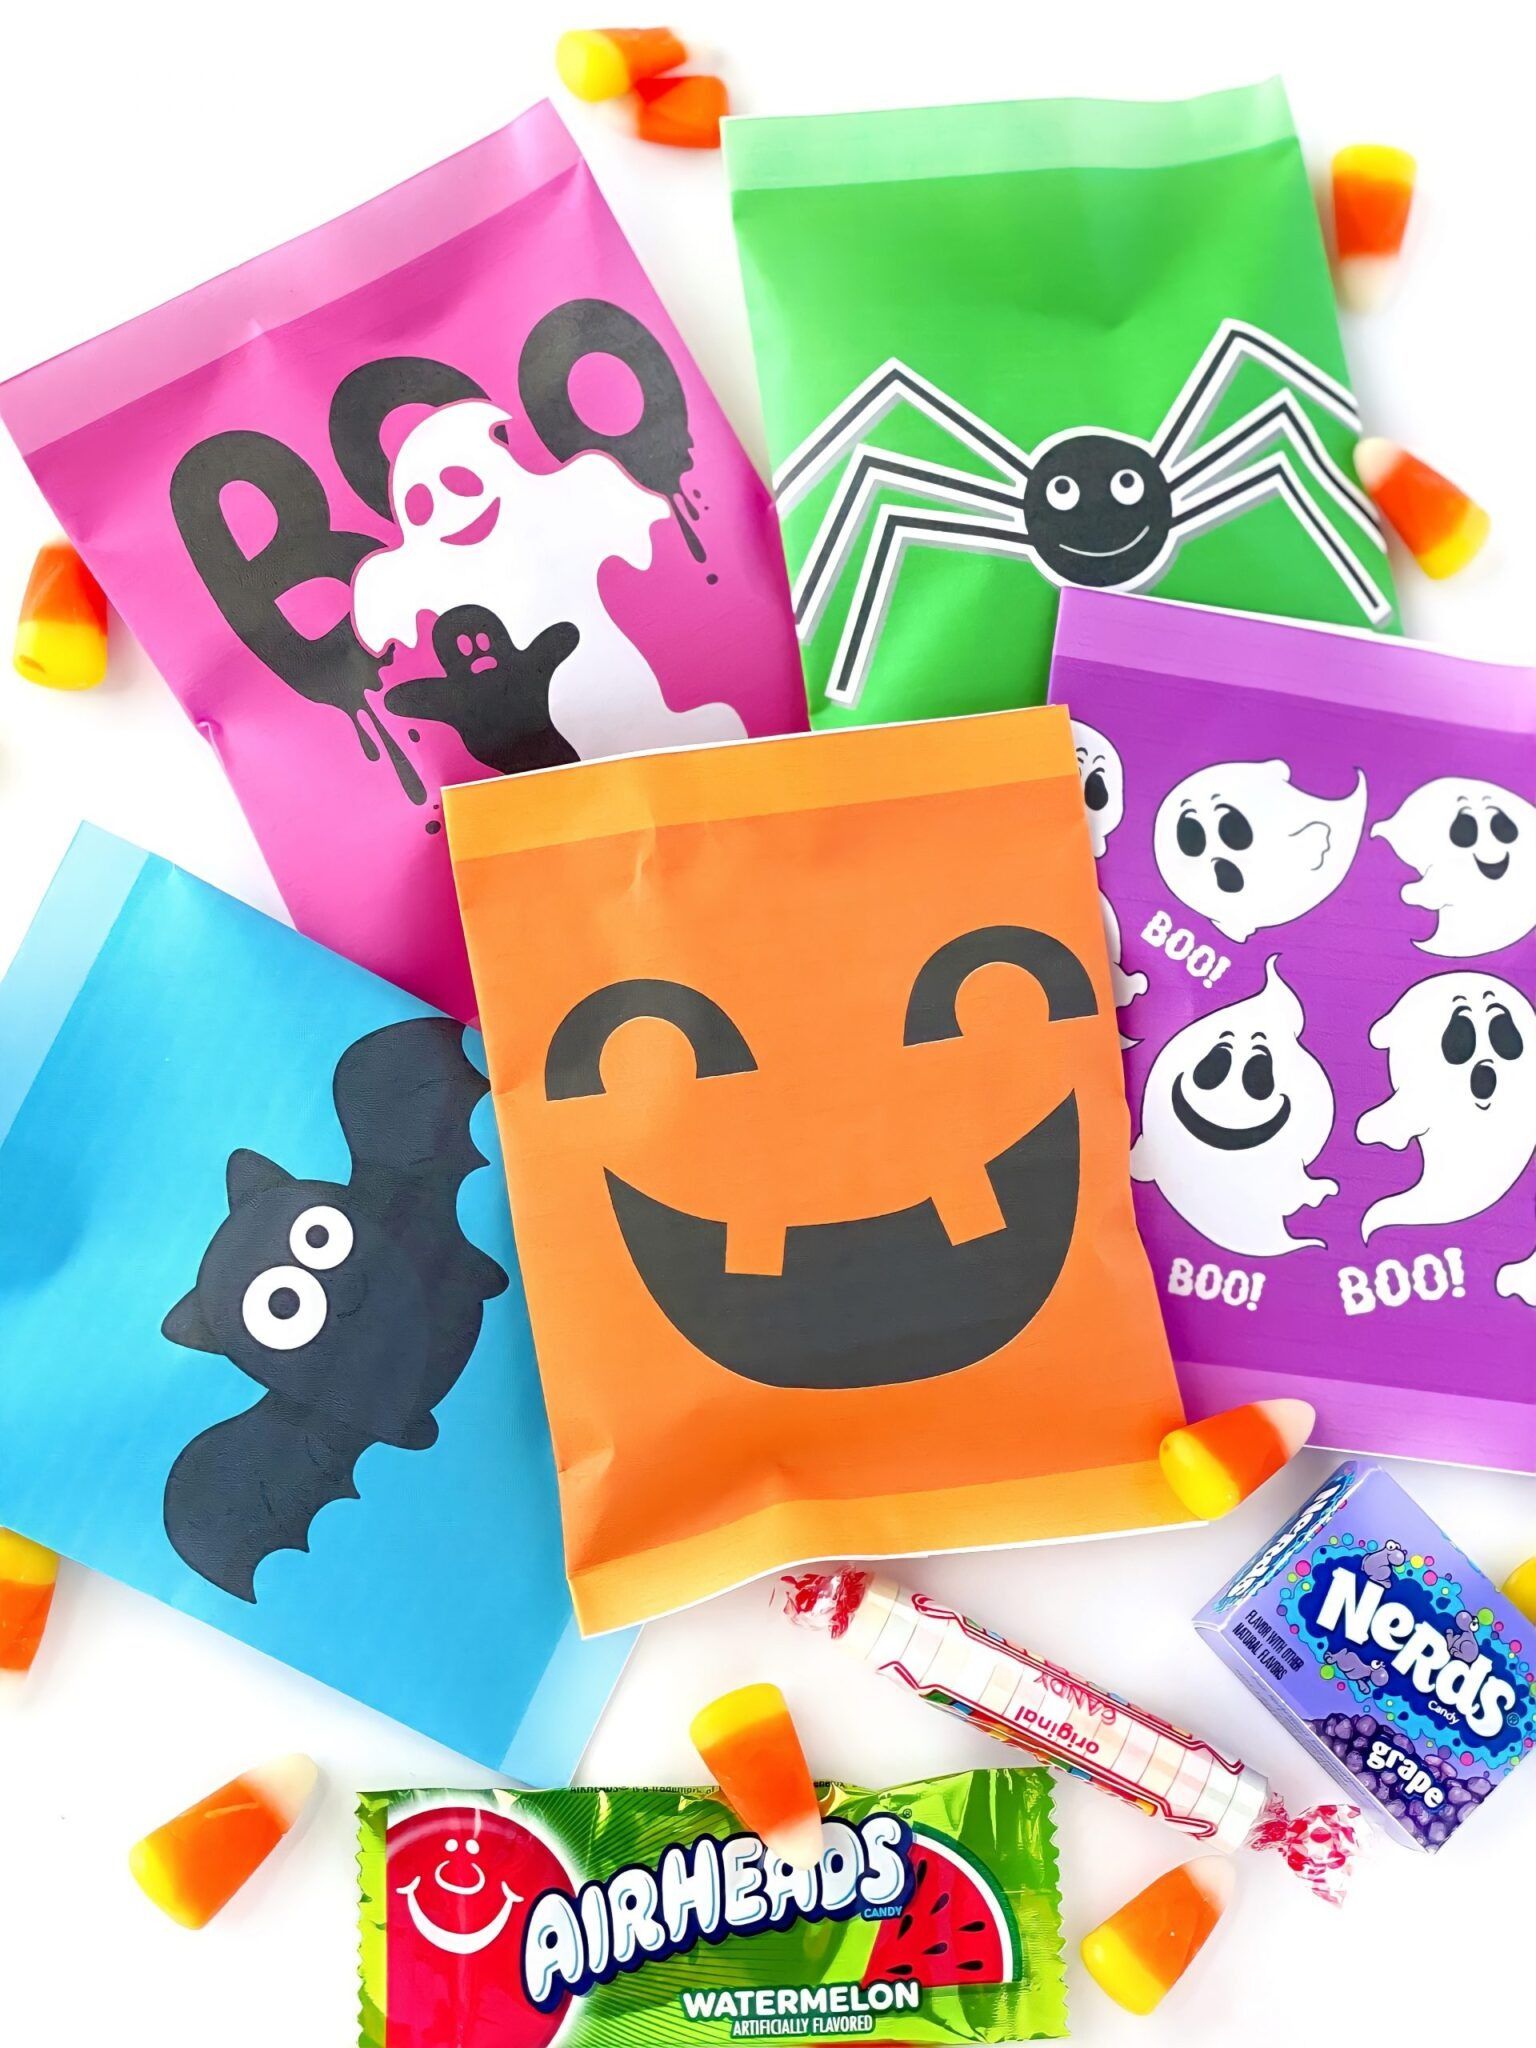 22 Best Halloween Treat Bags 2021  Goodie Bags for Candy and  TrickorTreating